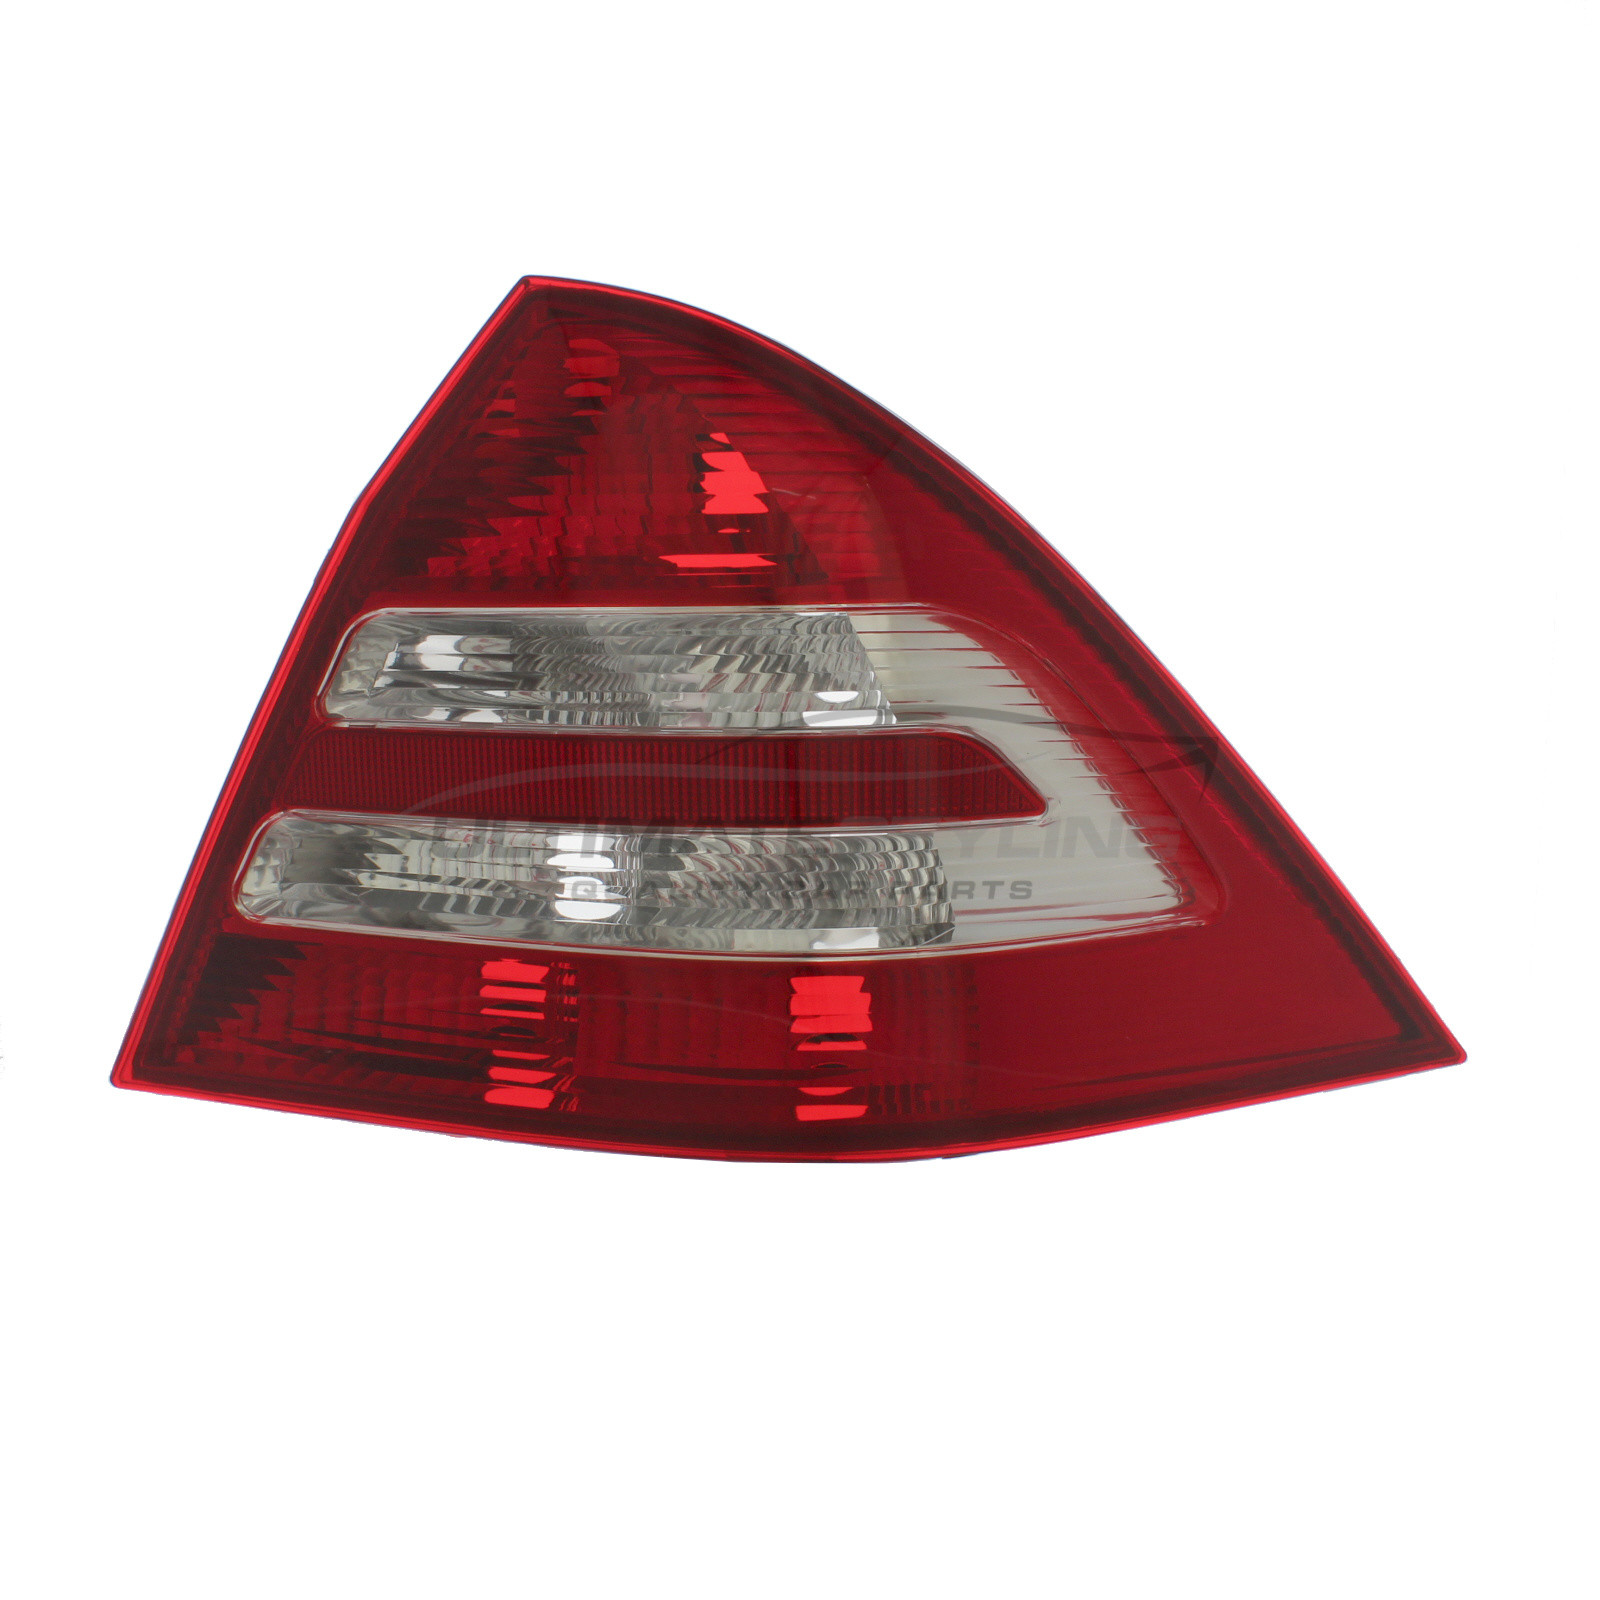 Mercedes Benz C Class 2004-2007 Non-LED Rear Light / Tail Light Excluding Bulb Holder Drivers Side (RH)